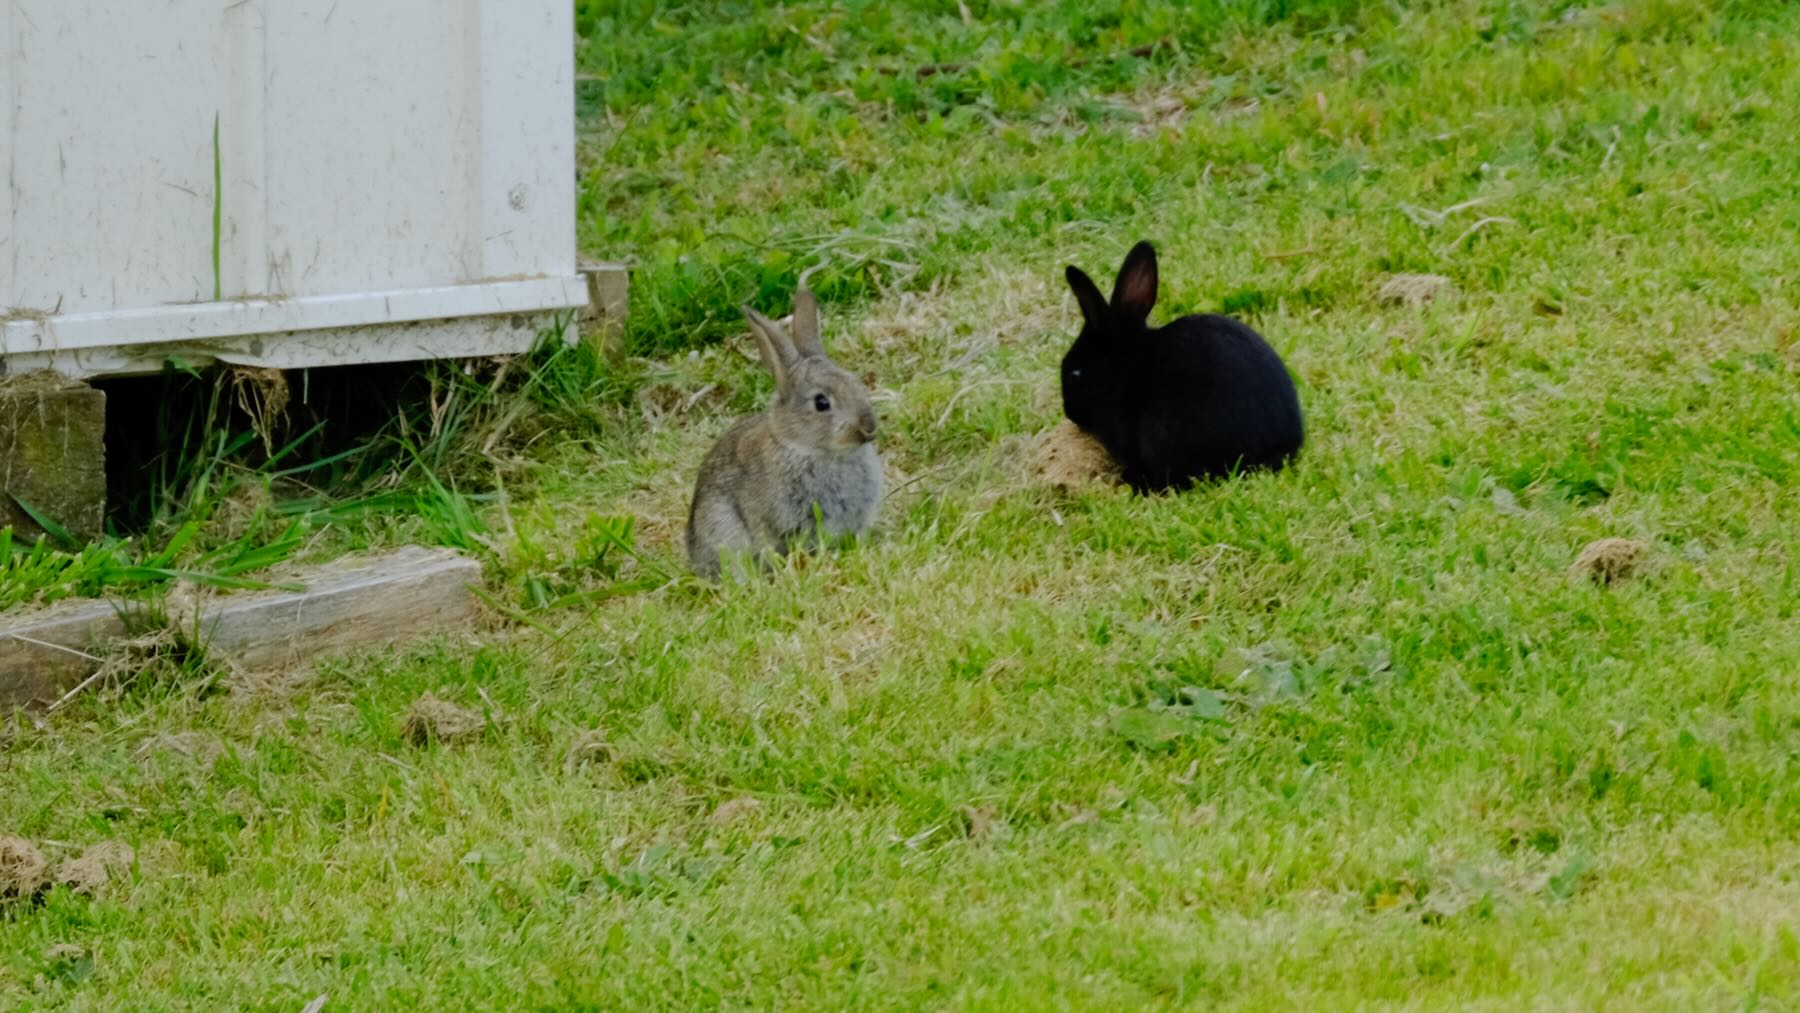 Two baby rabbits on grass, one black and one brown. 